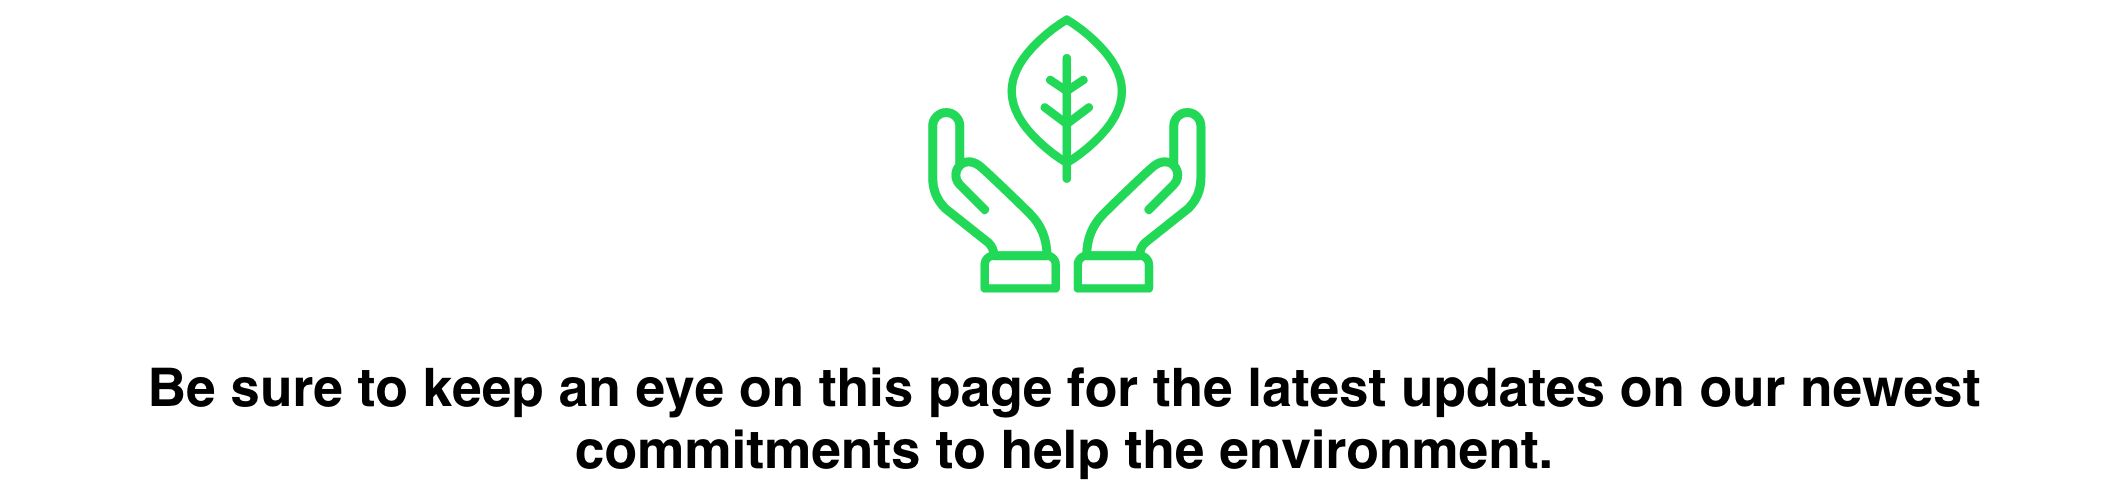 Be sure to keep an eye on this page for the latest updates on our commitments to help the environment. 